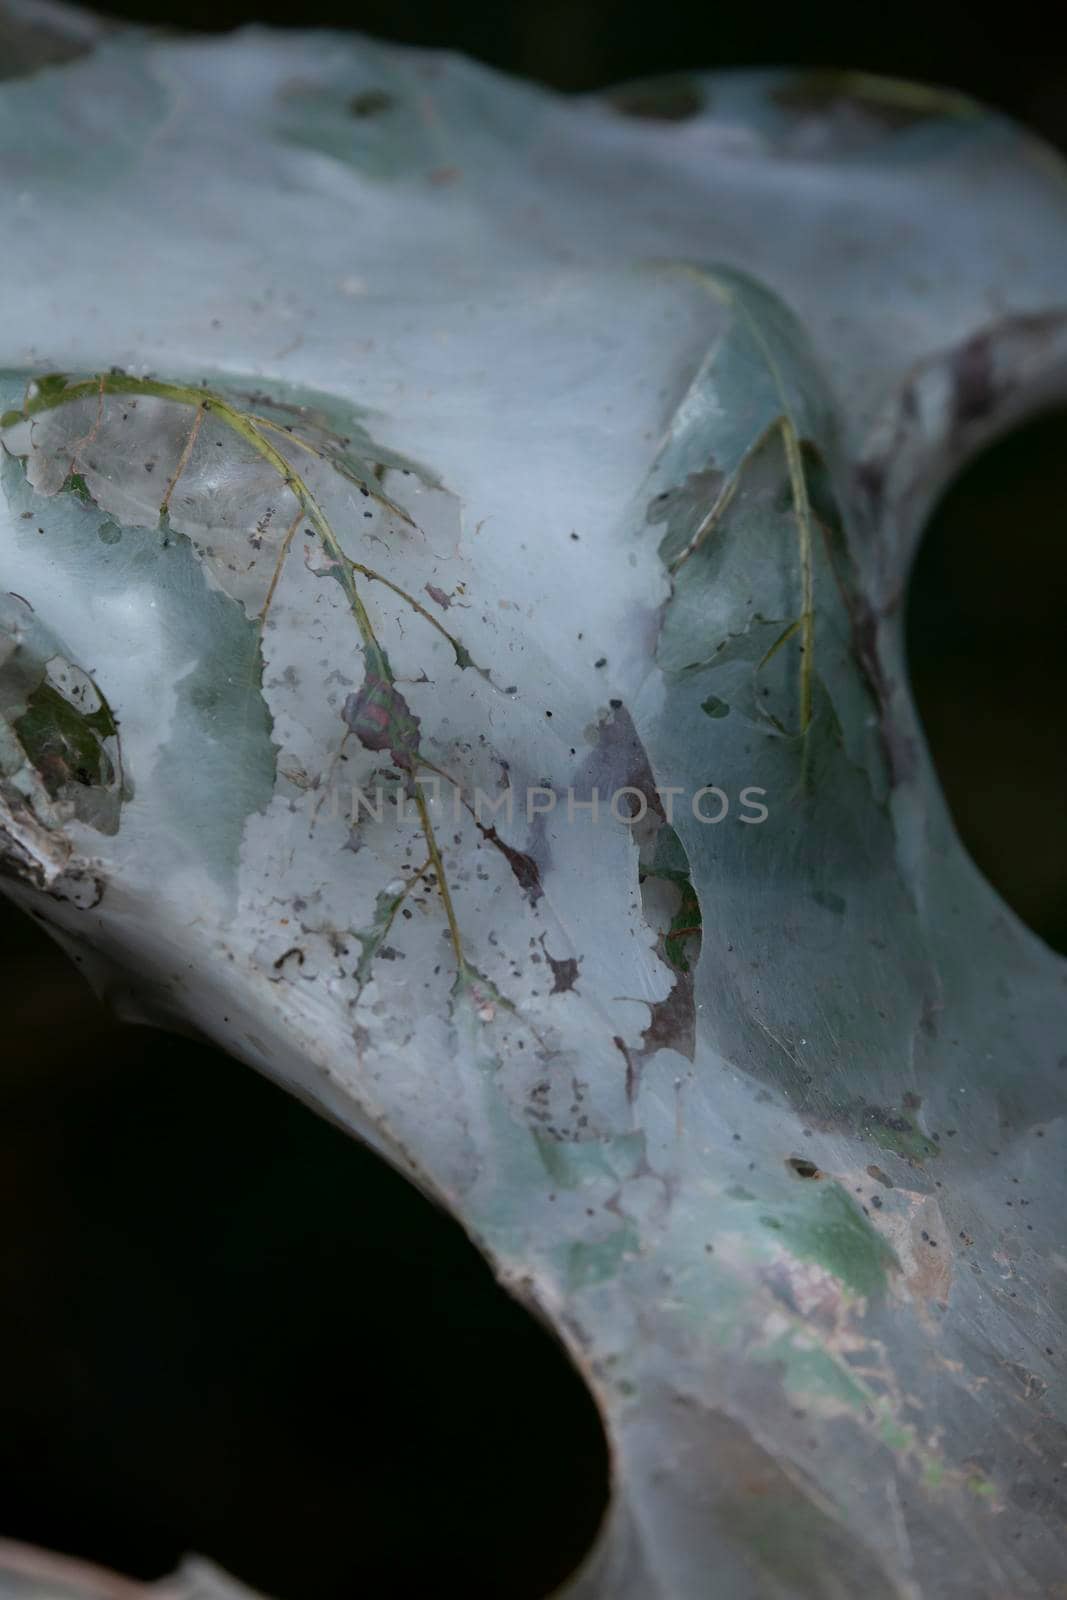 Fall webworms (Hyphantria cunea) in a large cocoon nest during the Fall season